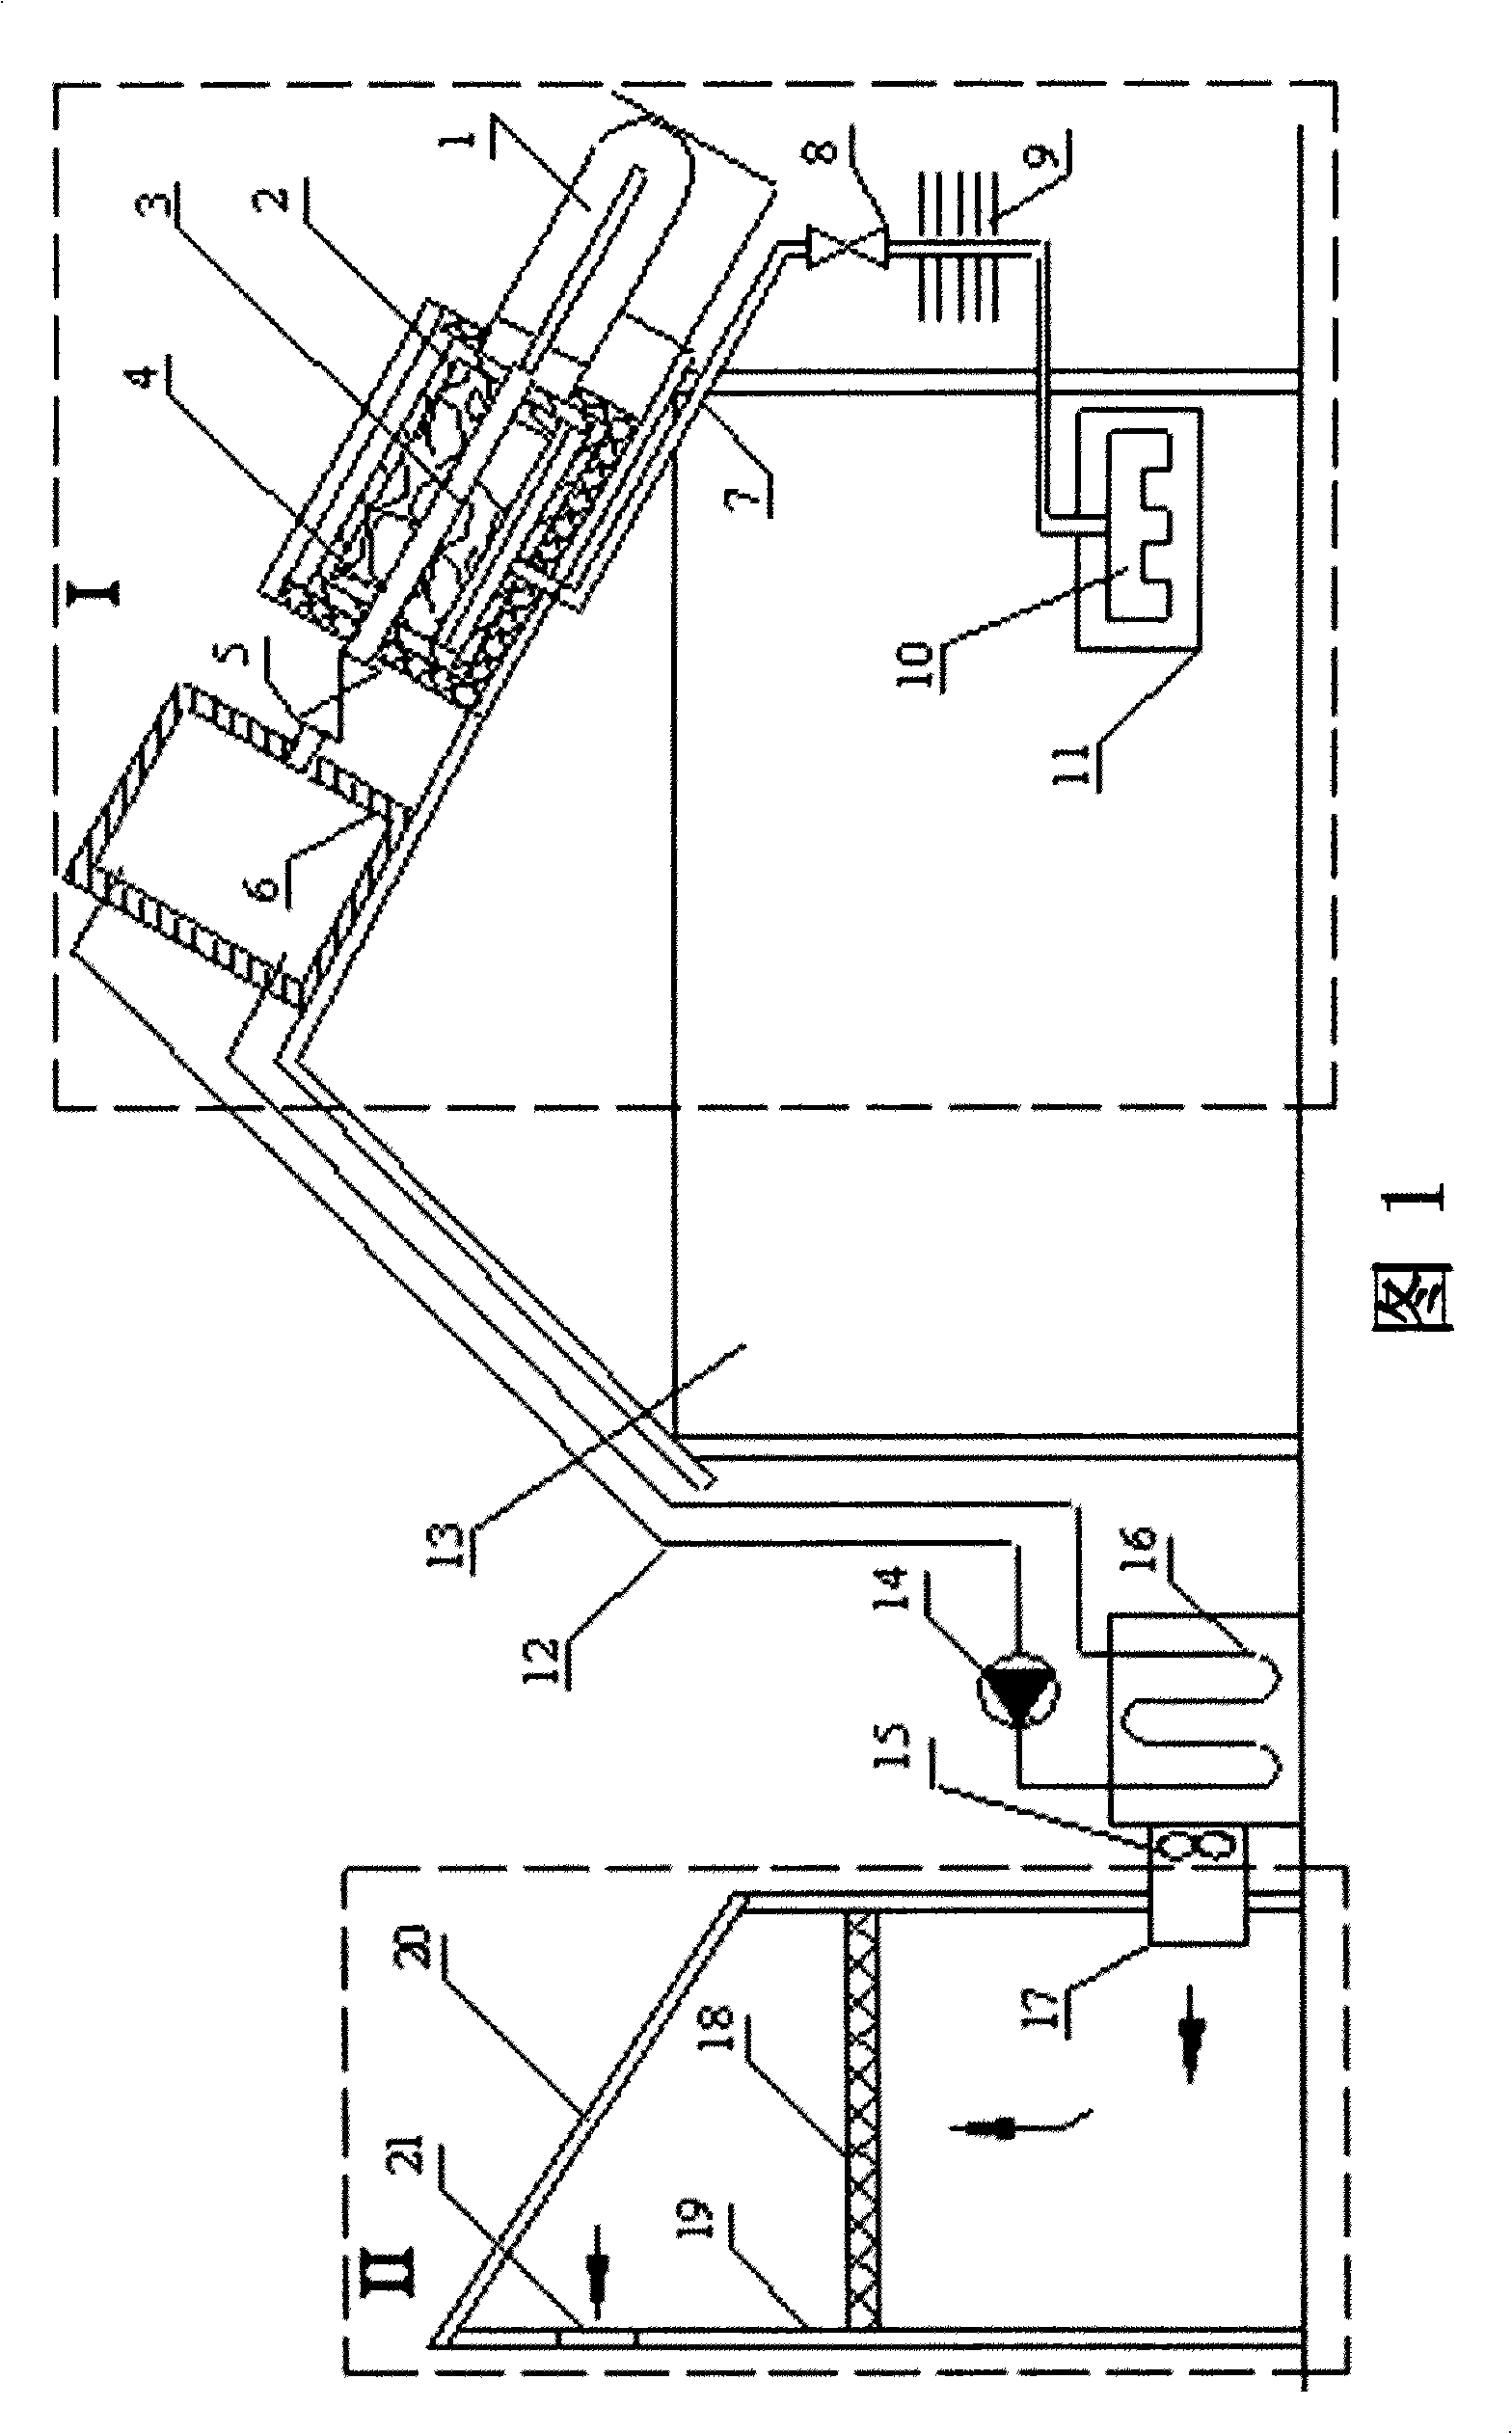 Solar complex energy device for refrigerated storage and desiccation of agricultural products